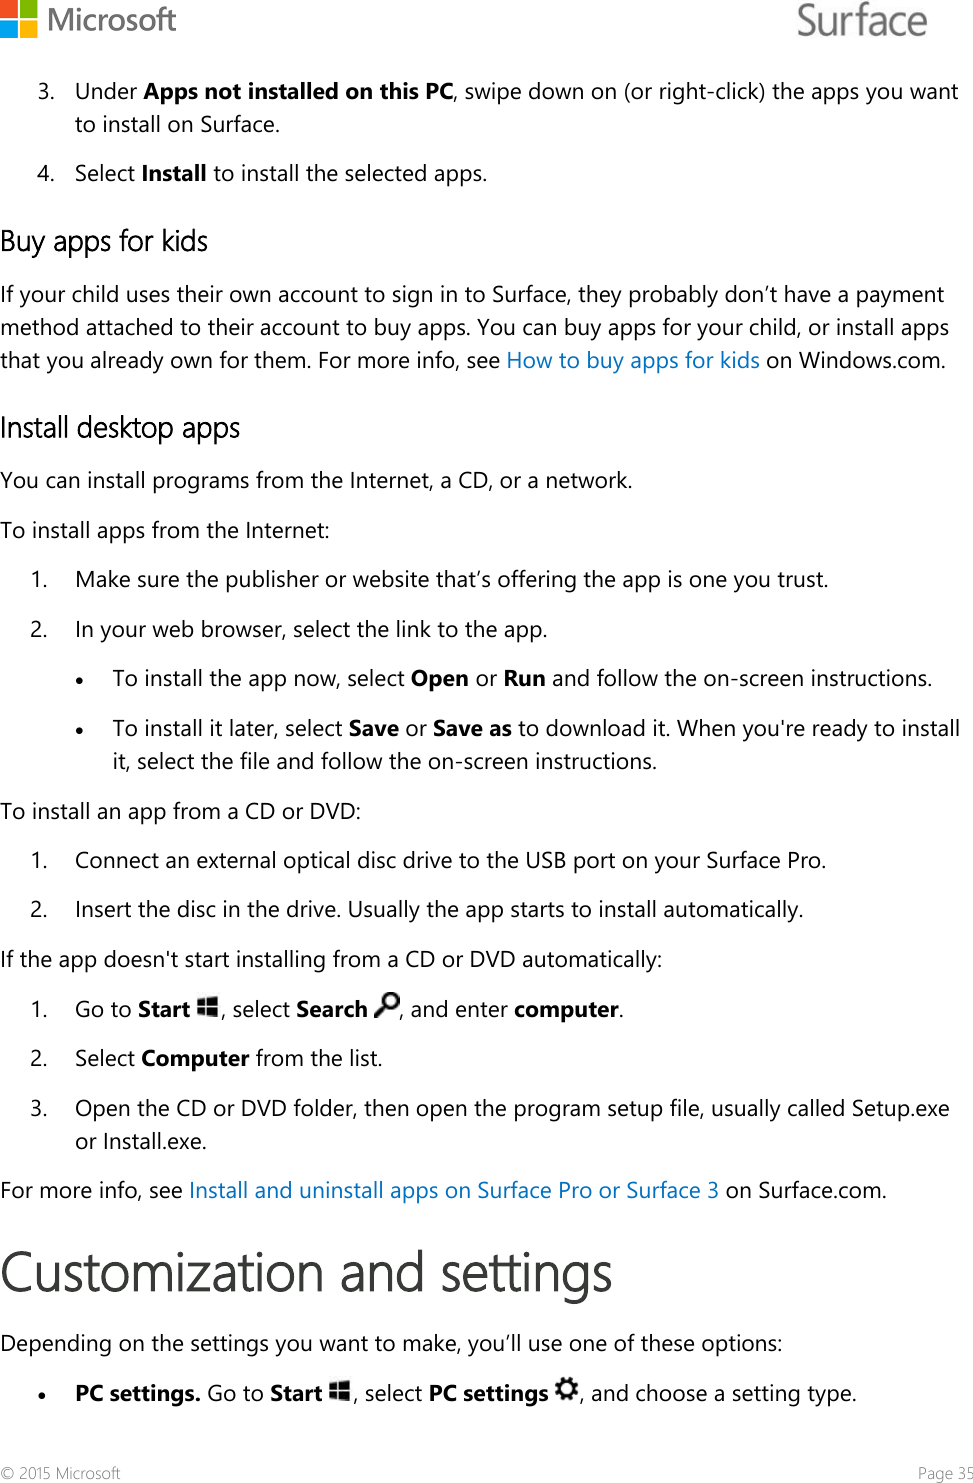    3. Under Apps not installed on this PC, swipe down on (or right-click) the apps you want to install on Surface. 4. Select Install to install the selected apps. Buy apps for kids If your child uses their own account to sign in to Surface, they probably don’t have a payment method attached to their account to buy apps. You can buy apps for your child, or install apps that you already own for them. For more info, see How to buy apps for kids on Windows.com. Install desktop apps You can install programs from the Internet, a CD, or a network. To install apps from the Internet: 1. Make sure the publisher or website that’s offering the app is one you trust. 2. In your web browser, select the link to the app. • To install the app now, select Open or Run and follow the on-screen instructions.  • To install it later, select Save or Save as to download it. When you&apos;re ready to install it, select the file and follow the on-screen instructions. To install an app from a CD or DVD: 1. Connect an external optical disc drive to the USB port on your Surface Pro.  2. Insert the disc in the drive. Usually the app starts to install automatically. If the app doesn&apos;t start installing from a CD or DVD automatically:  1. Go to Start , select Search , and enter computer.  2. Select Computer from the list.  3. Open the CD or DVD folder, then open the program setup file, usually called Setup.exe or Install.exe. For more info, see Install and uninstall apps on Surface Pro or Surface 3 on Surface.com. Customization and settings  Depending on the settings you want to make, you’ll use one of these options: • PC settings. Go to Start , select PC settings , and choose a setting type. © 2015 Microsoft    Page 35 